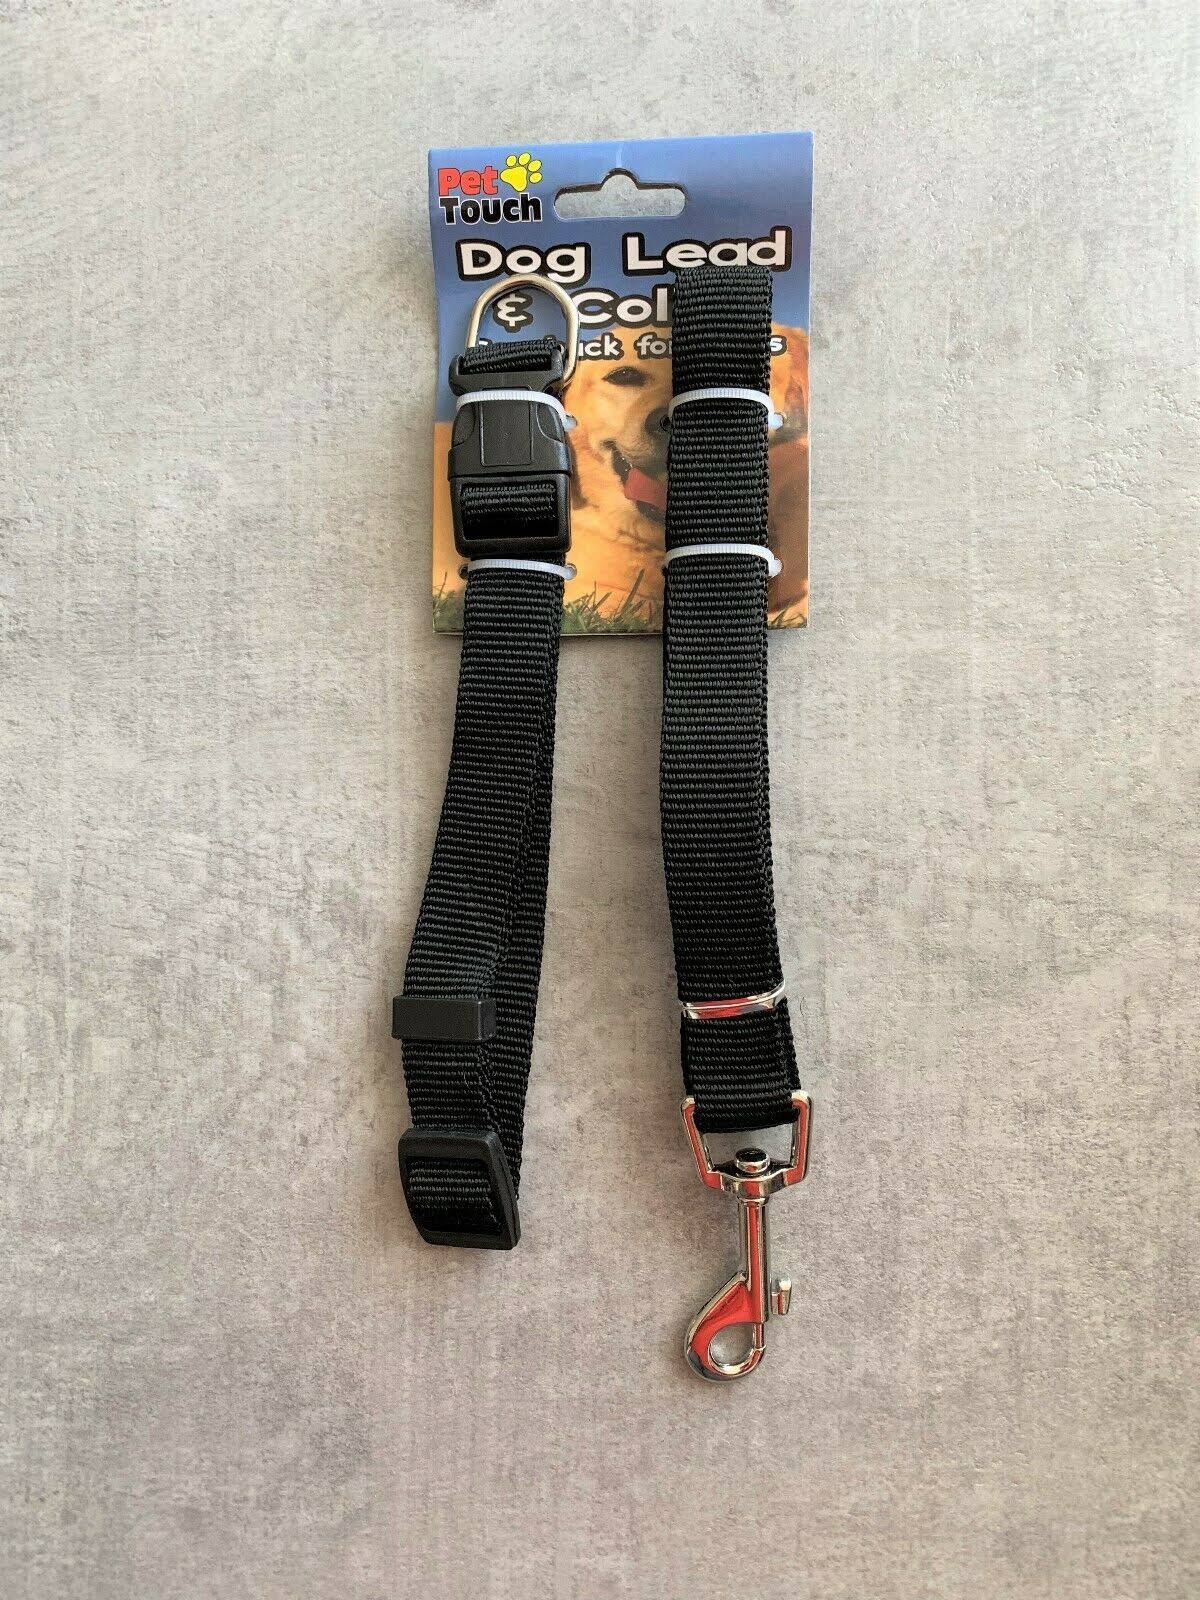 Pet Touch Dog Lead & Collar Sets in 3 Colours Black - Blue - Red